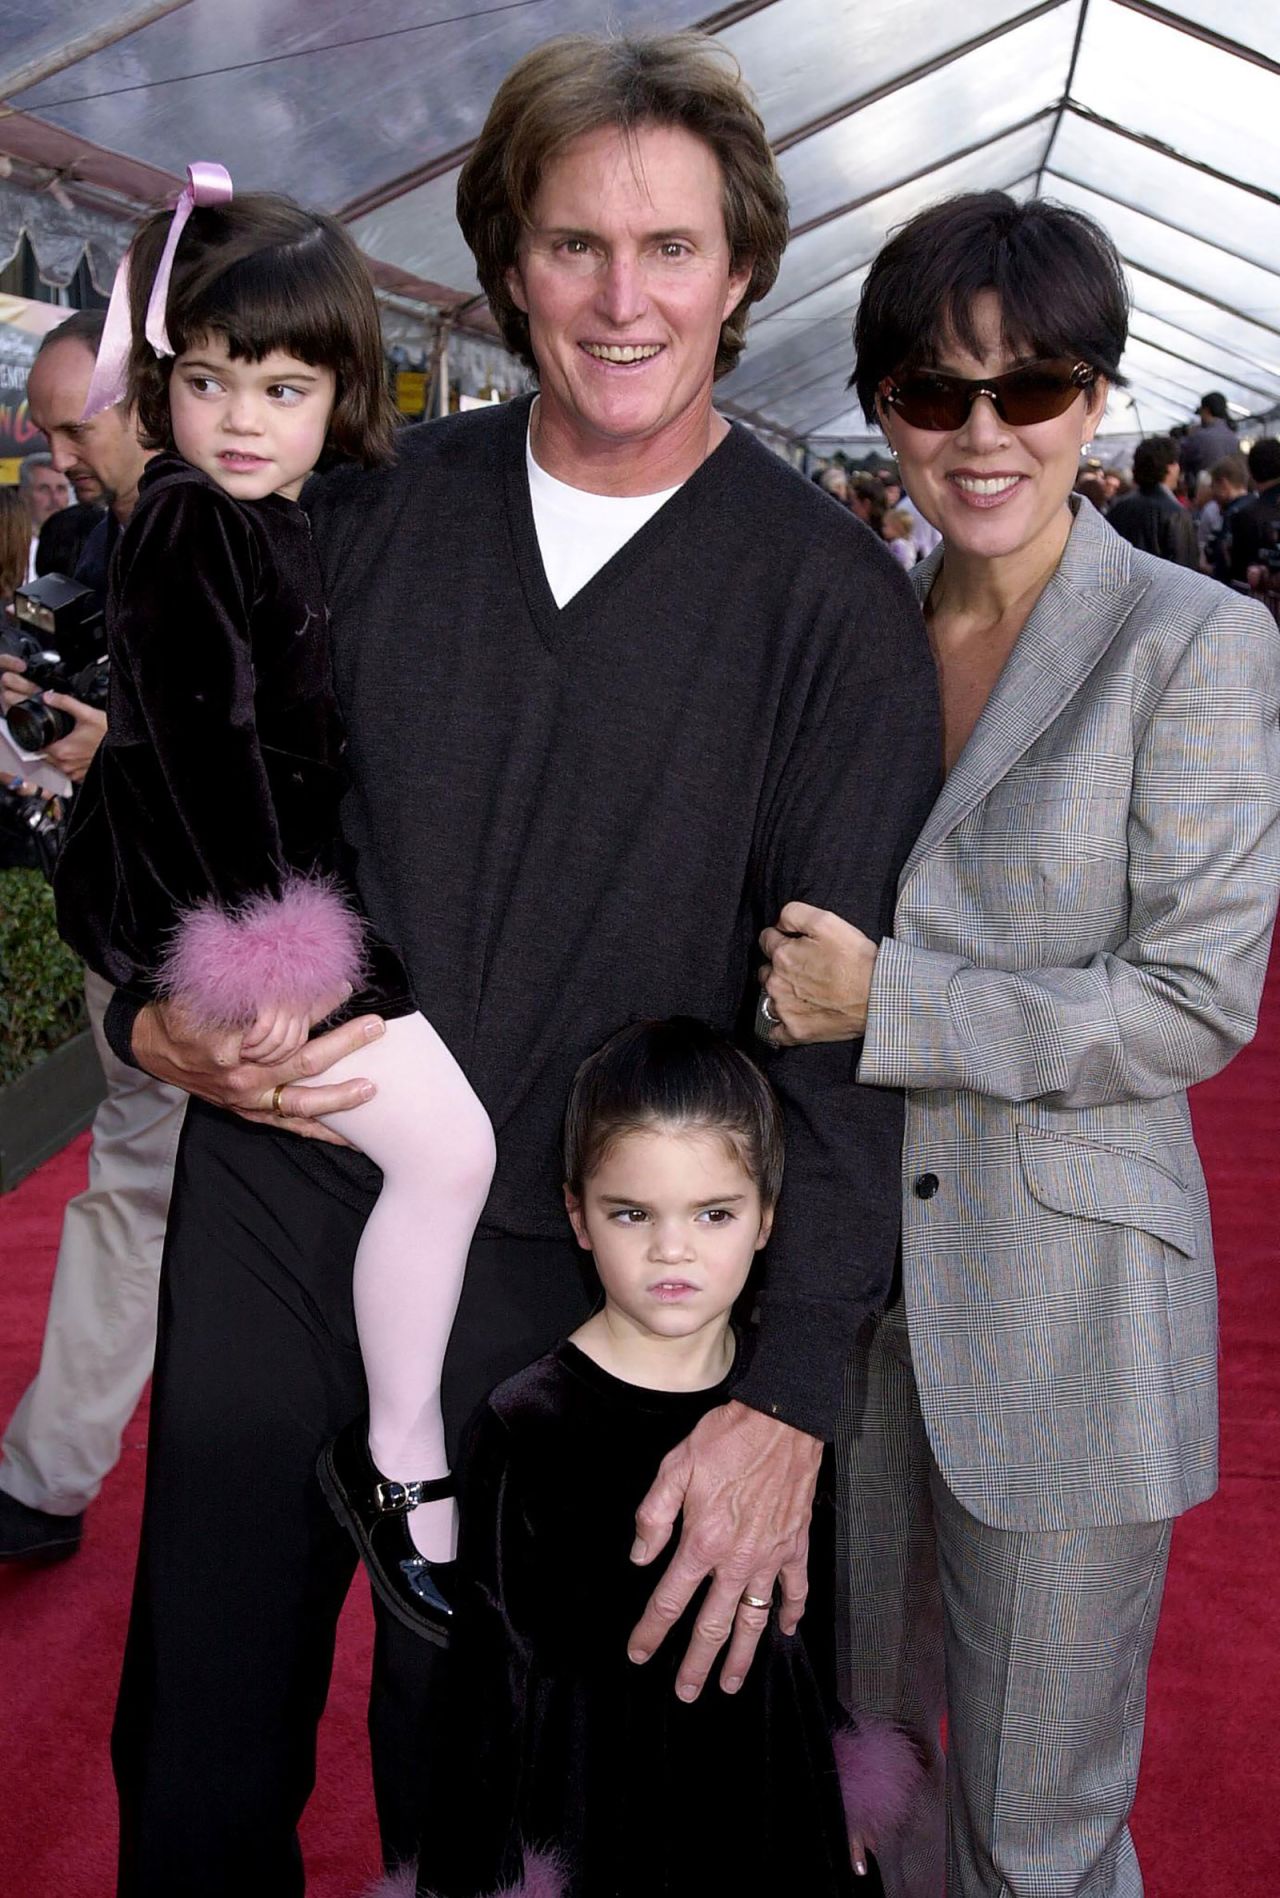 The Jenner family attends the premiere of "The Emperor's New Groove" in 2000. Jenner and Kris had two kids together: Kylie, left, and Kendall.